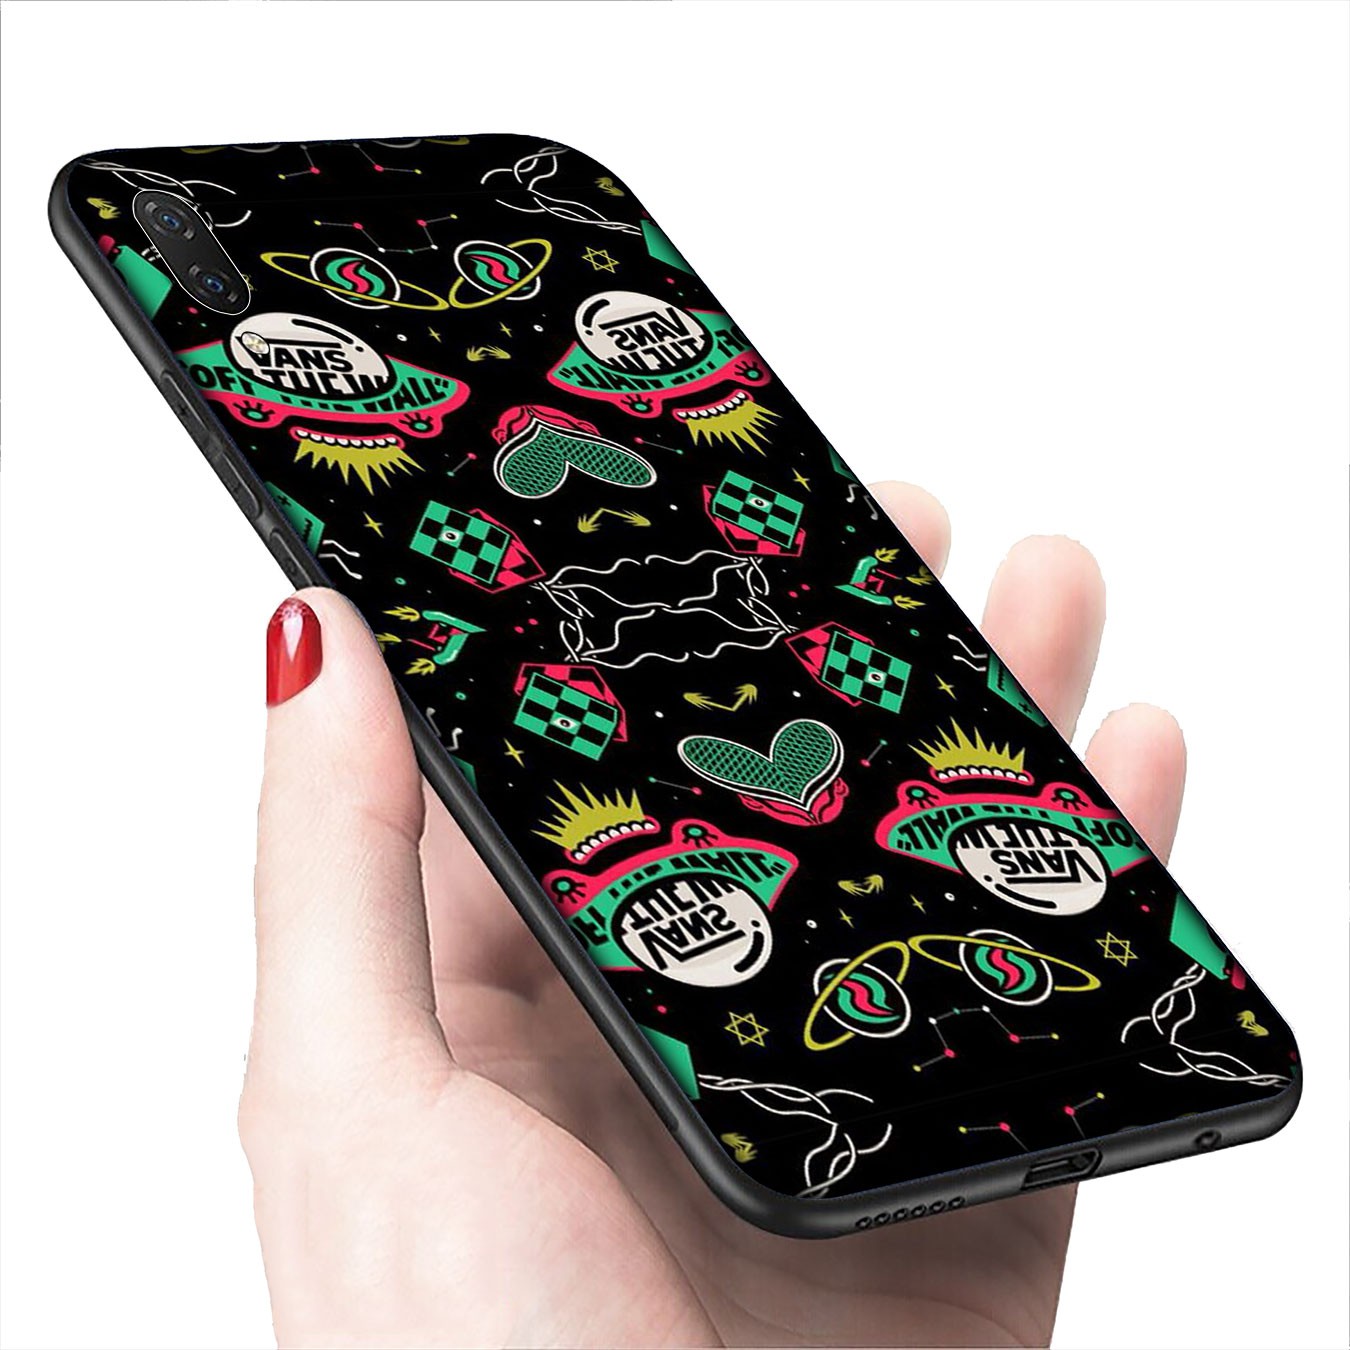 Soft Silicone iPhone 11 Pro XR X XS Max 7 8 6 6s Plus + Cover Vans Art Cartoon Phone Case